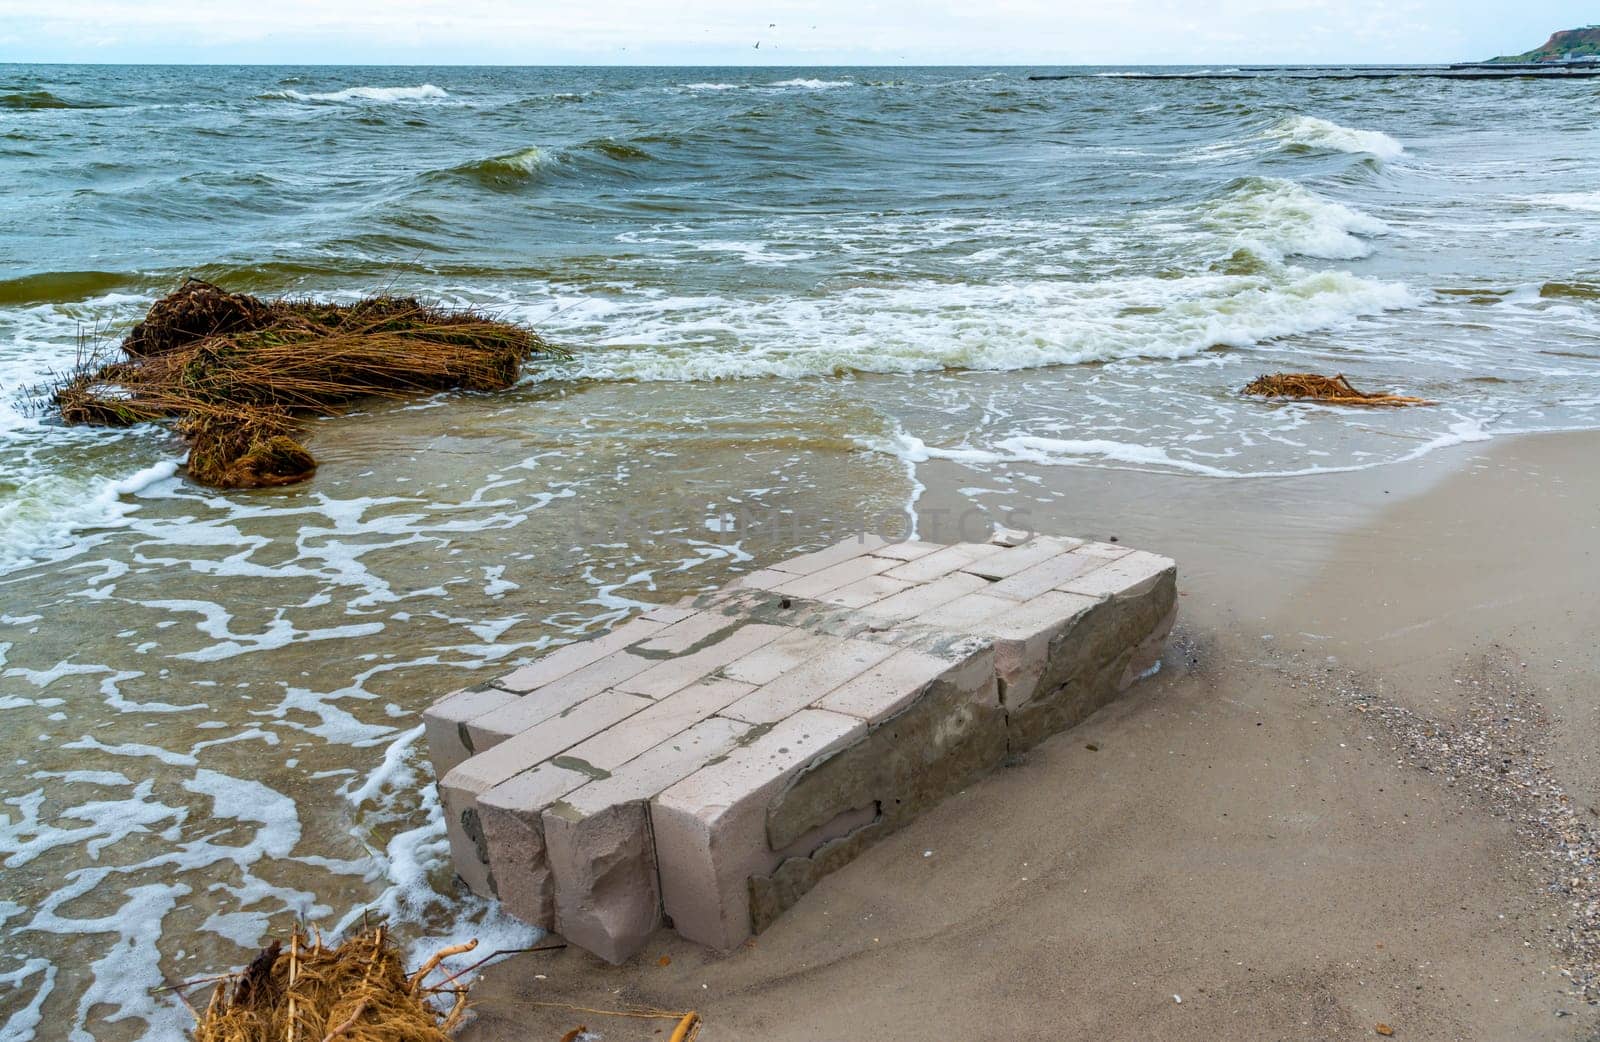 The explosion of the dam of the Kakhovka power plant, tons of floating debris and even foam concrete walls sailed to the beaches of Odessa by Hydrobiolog